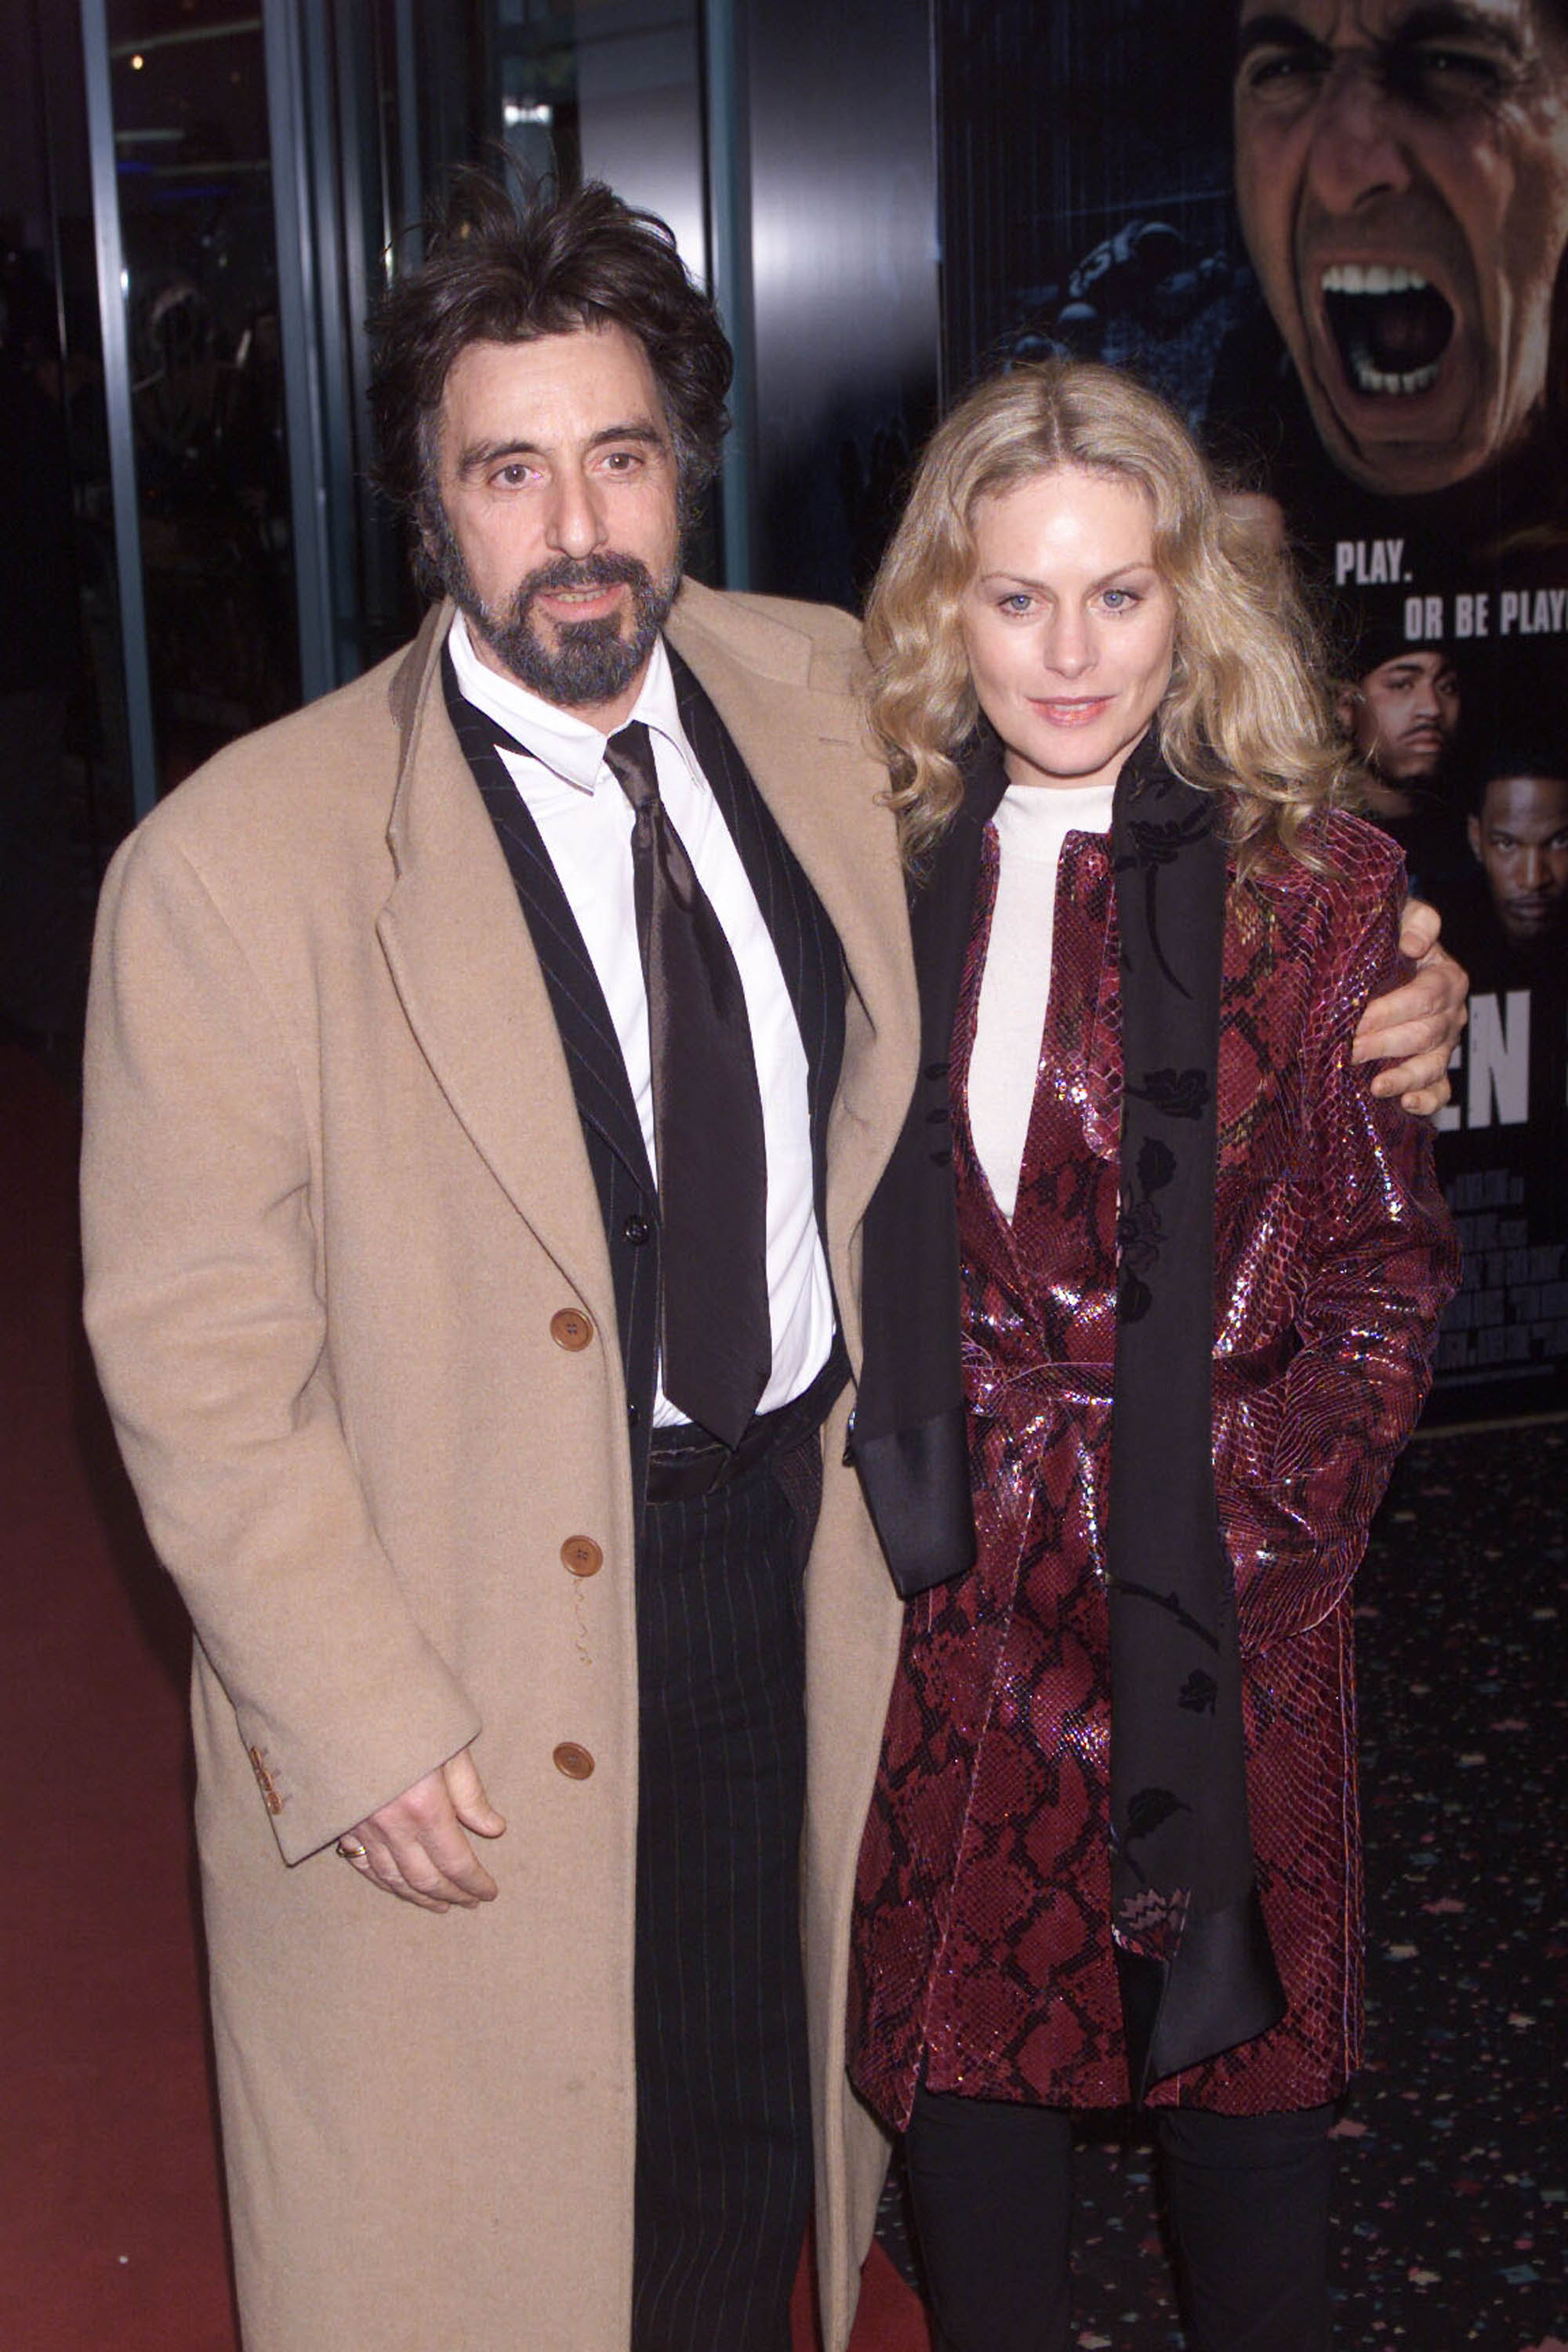 Al Pacino and Beverly D'Angelo at the UK premiere of the film "Any Given Sunday" in London on March 29, 2000  | Source: Getty Images